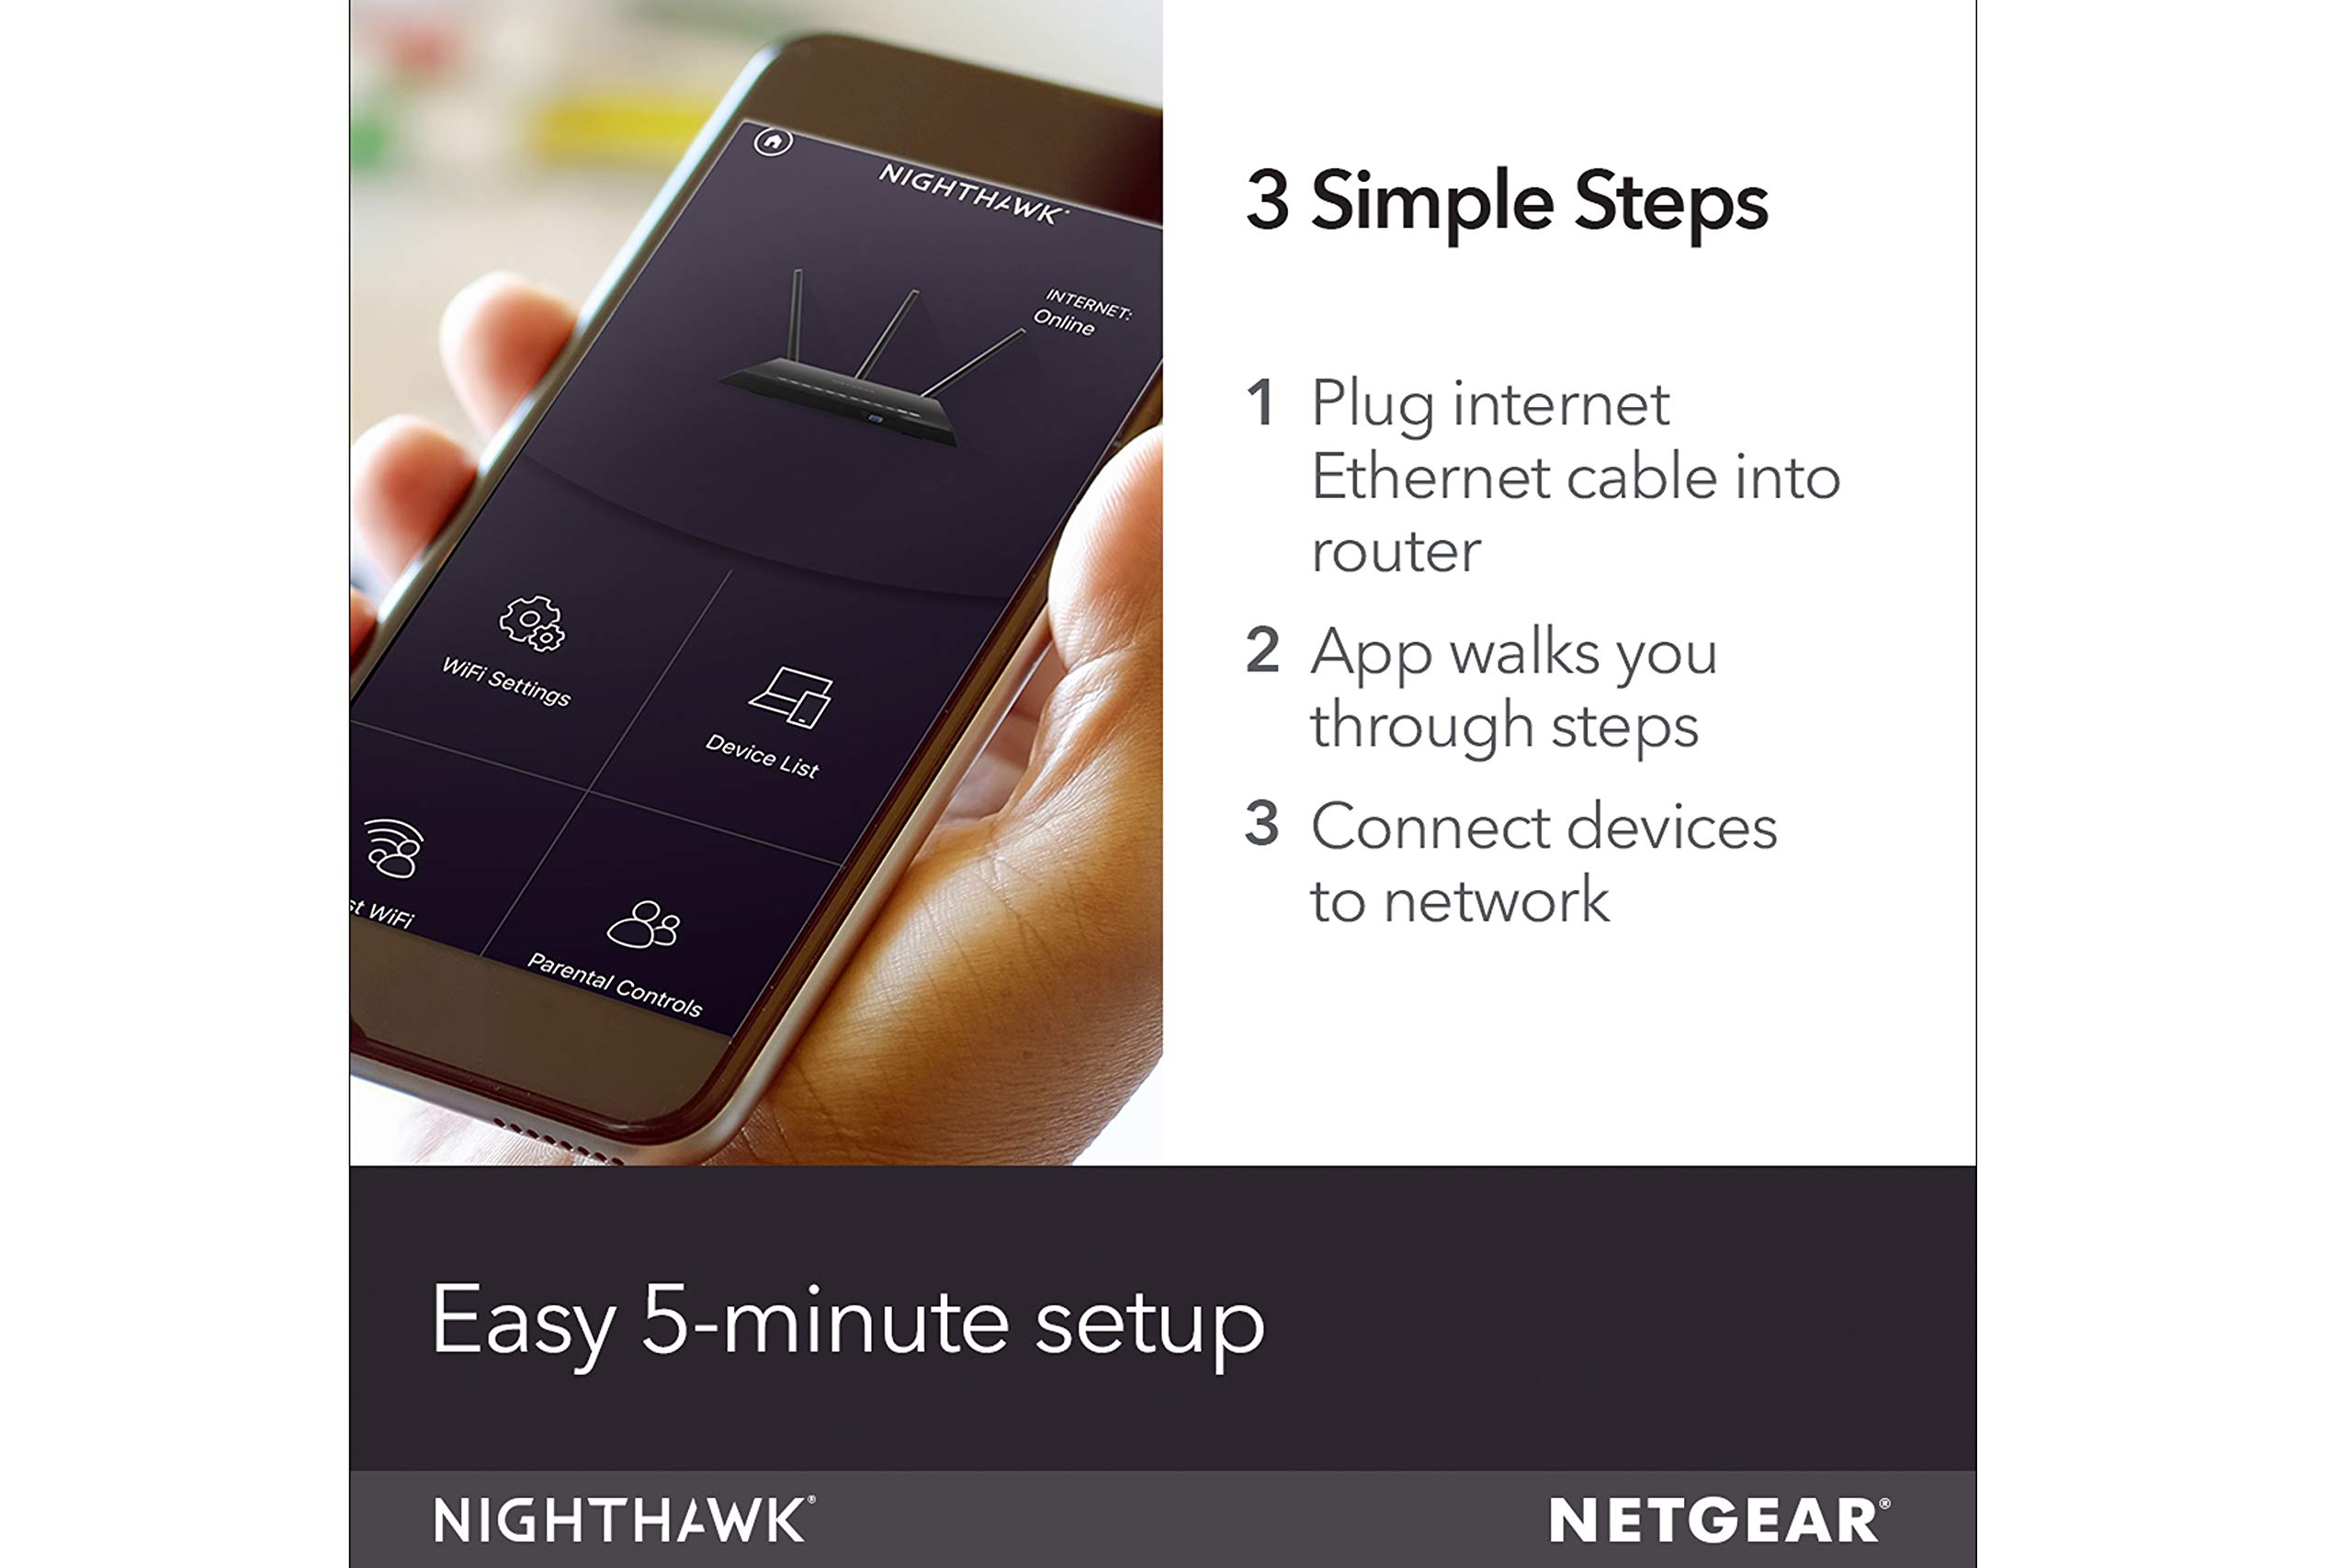 NETGEAR Nighthawk R7350 AC2400 Router: Fast Beamforming Wi-Fi for Gaming, 4K UHD Streaming. 2400Mbps, 2500 Sq Ft, QoS, Dual Core, 2.4 + 5GHz, 5 x GIGABIT + USB 3.0 Port, Smart WiFi Router R7350-NAS